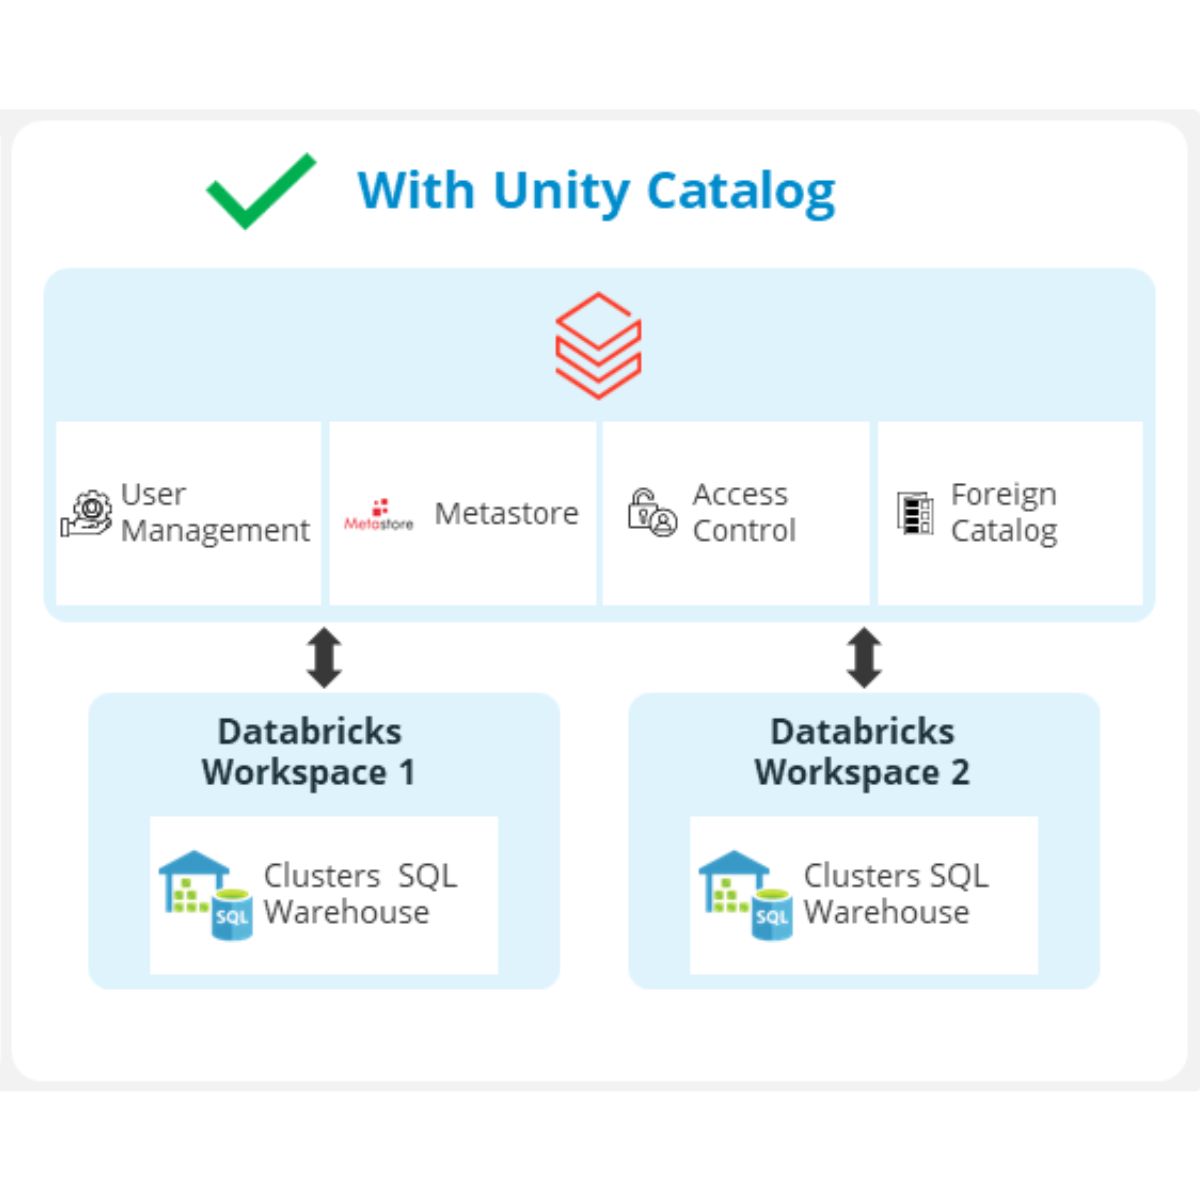 Getting started with the Databricks Unity Catalog